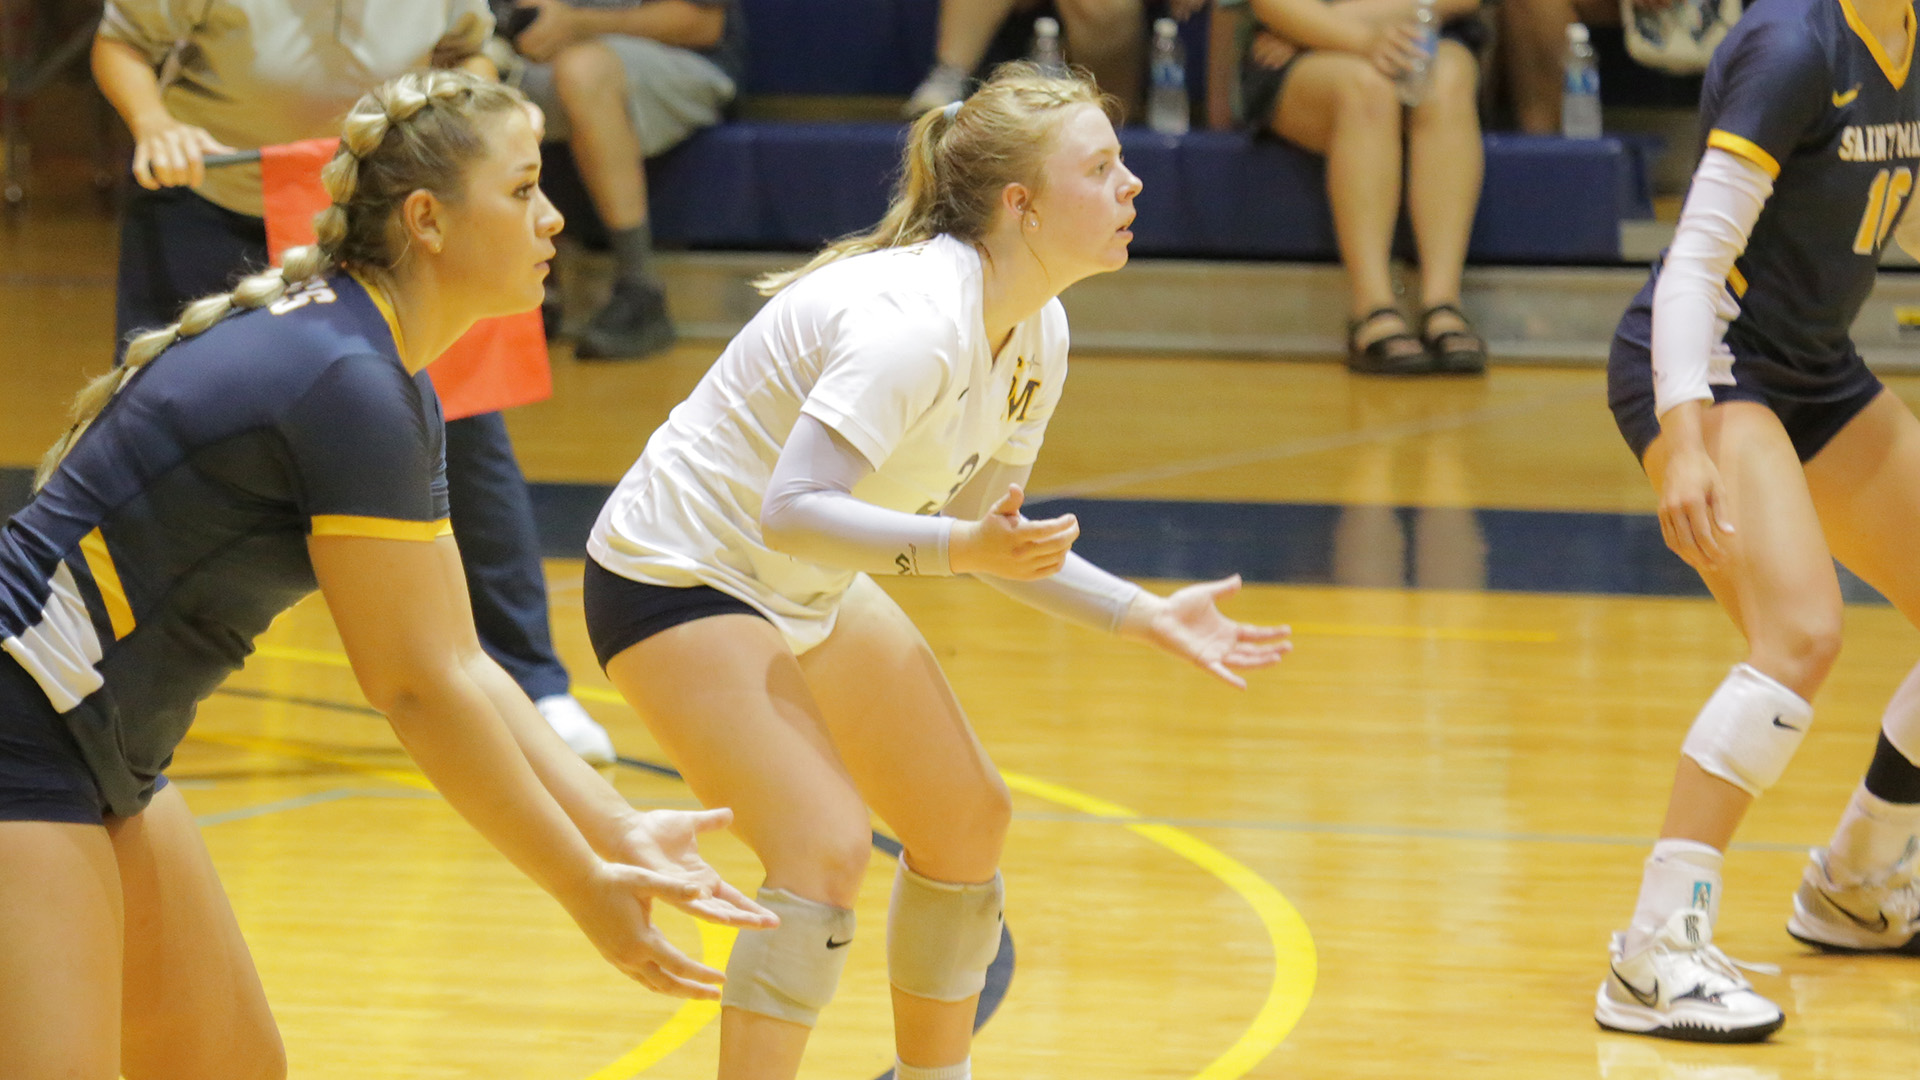 Spires Fall in Five Sets to Threshers